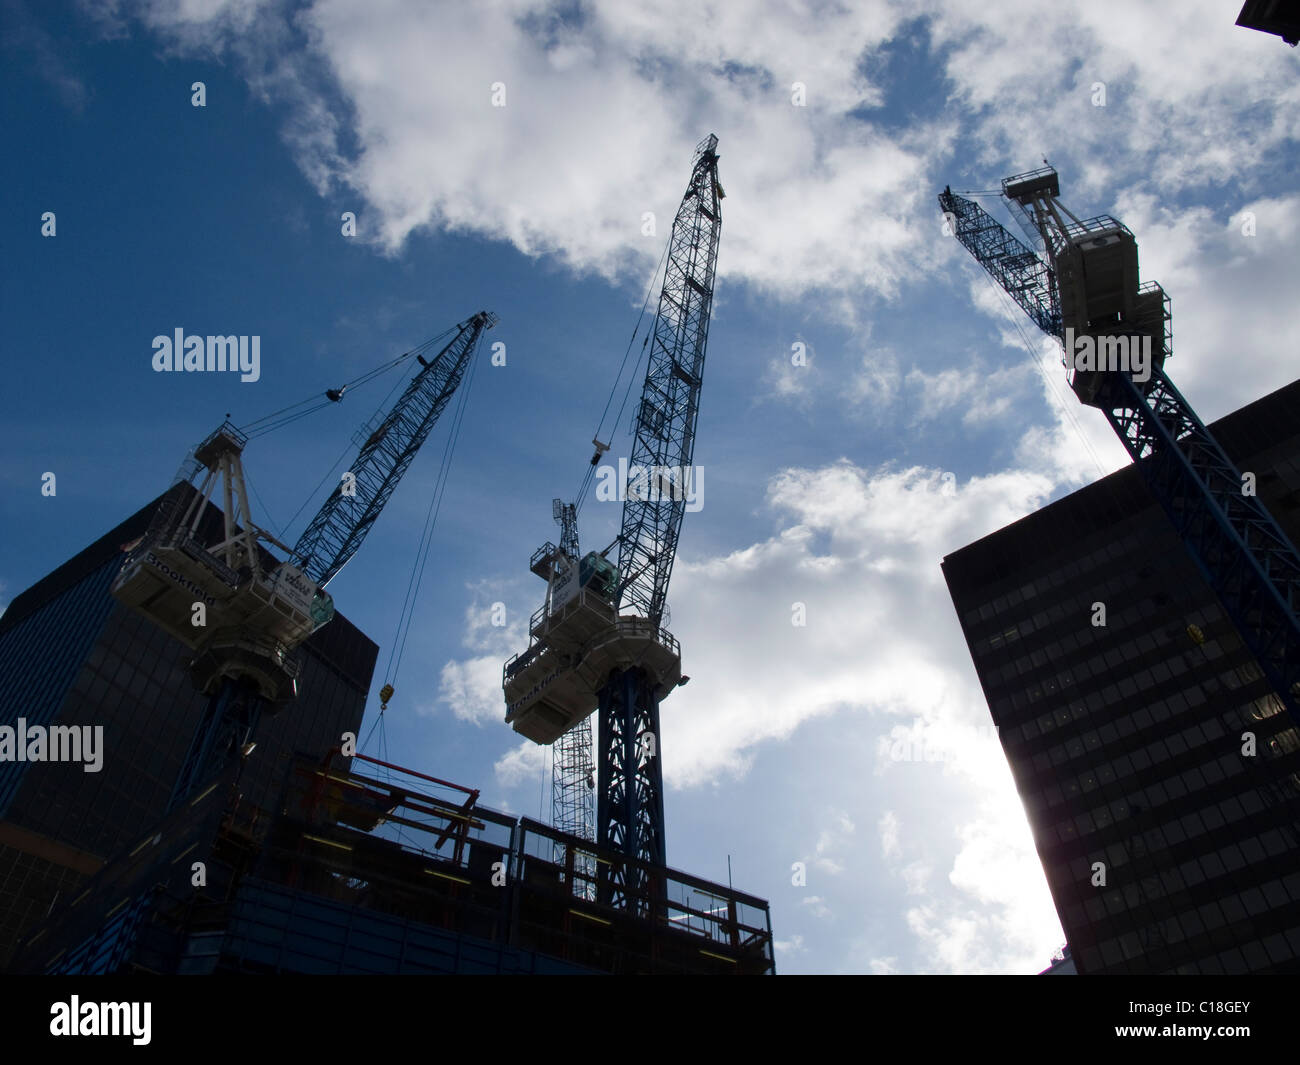 Tall cranes dominate the sky over the City of London on a construction site Stock Photo